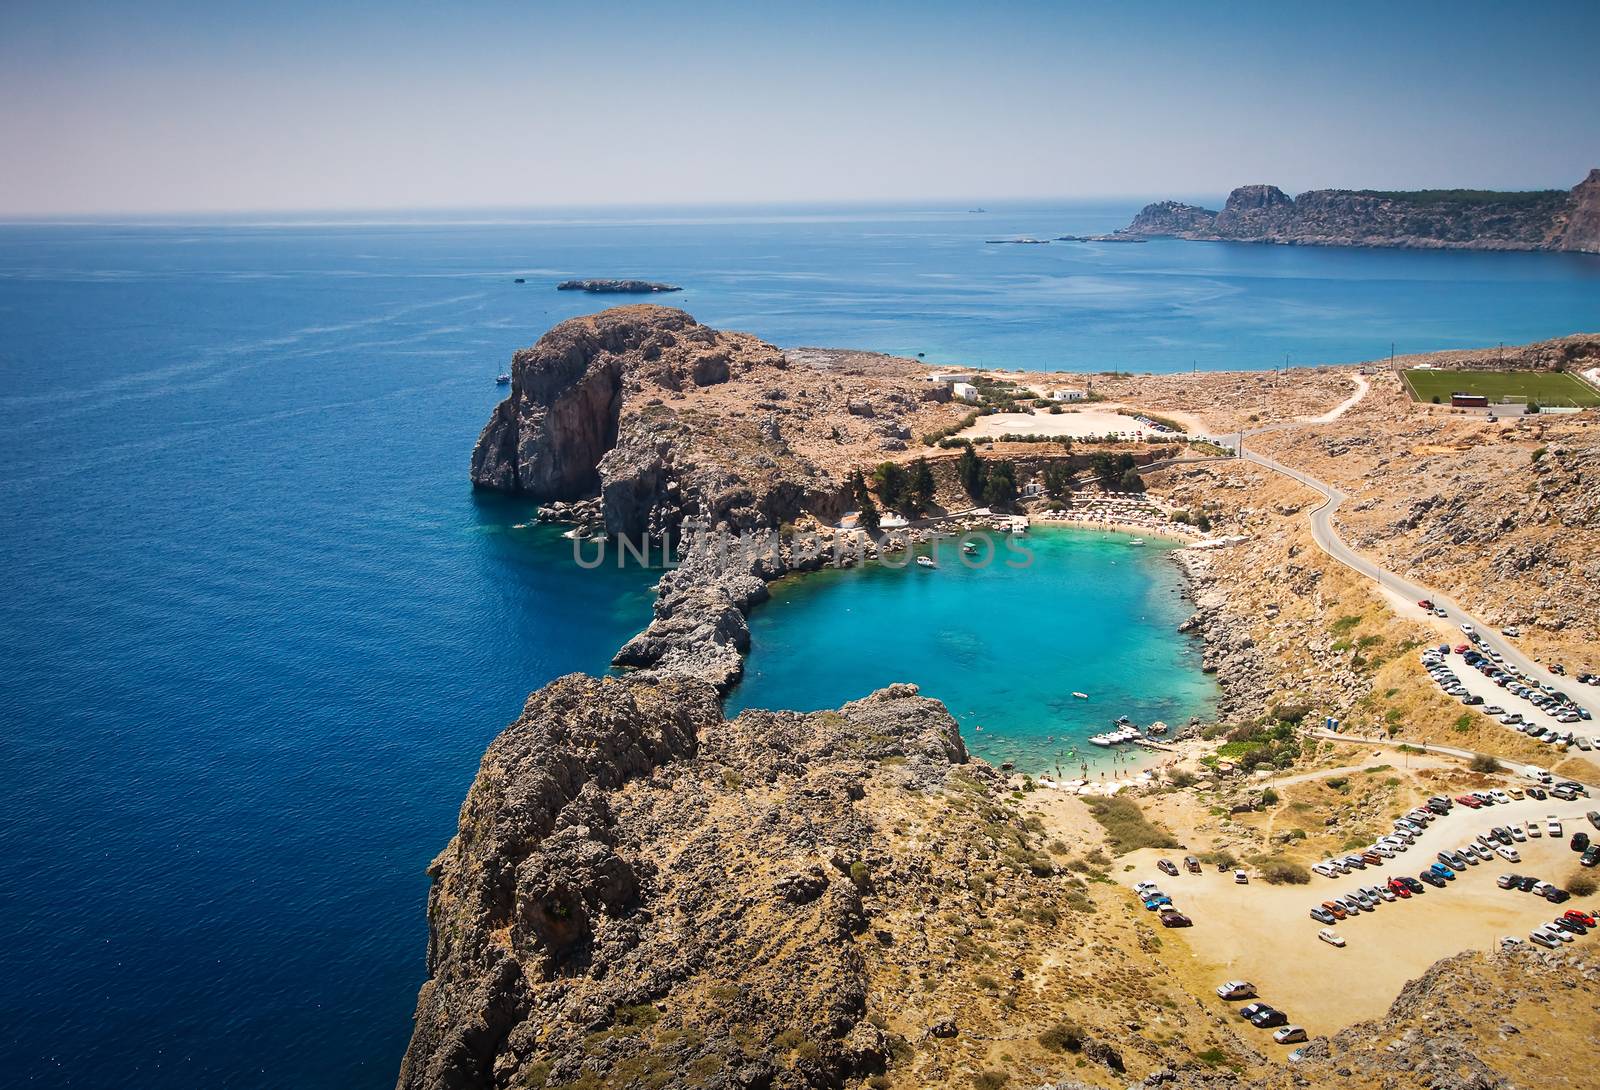 Looking down onto St Paul's Bay at Lindos on the Island of Rhode by melis